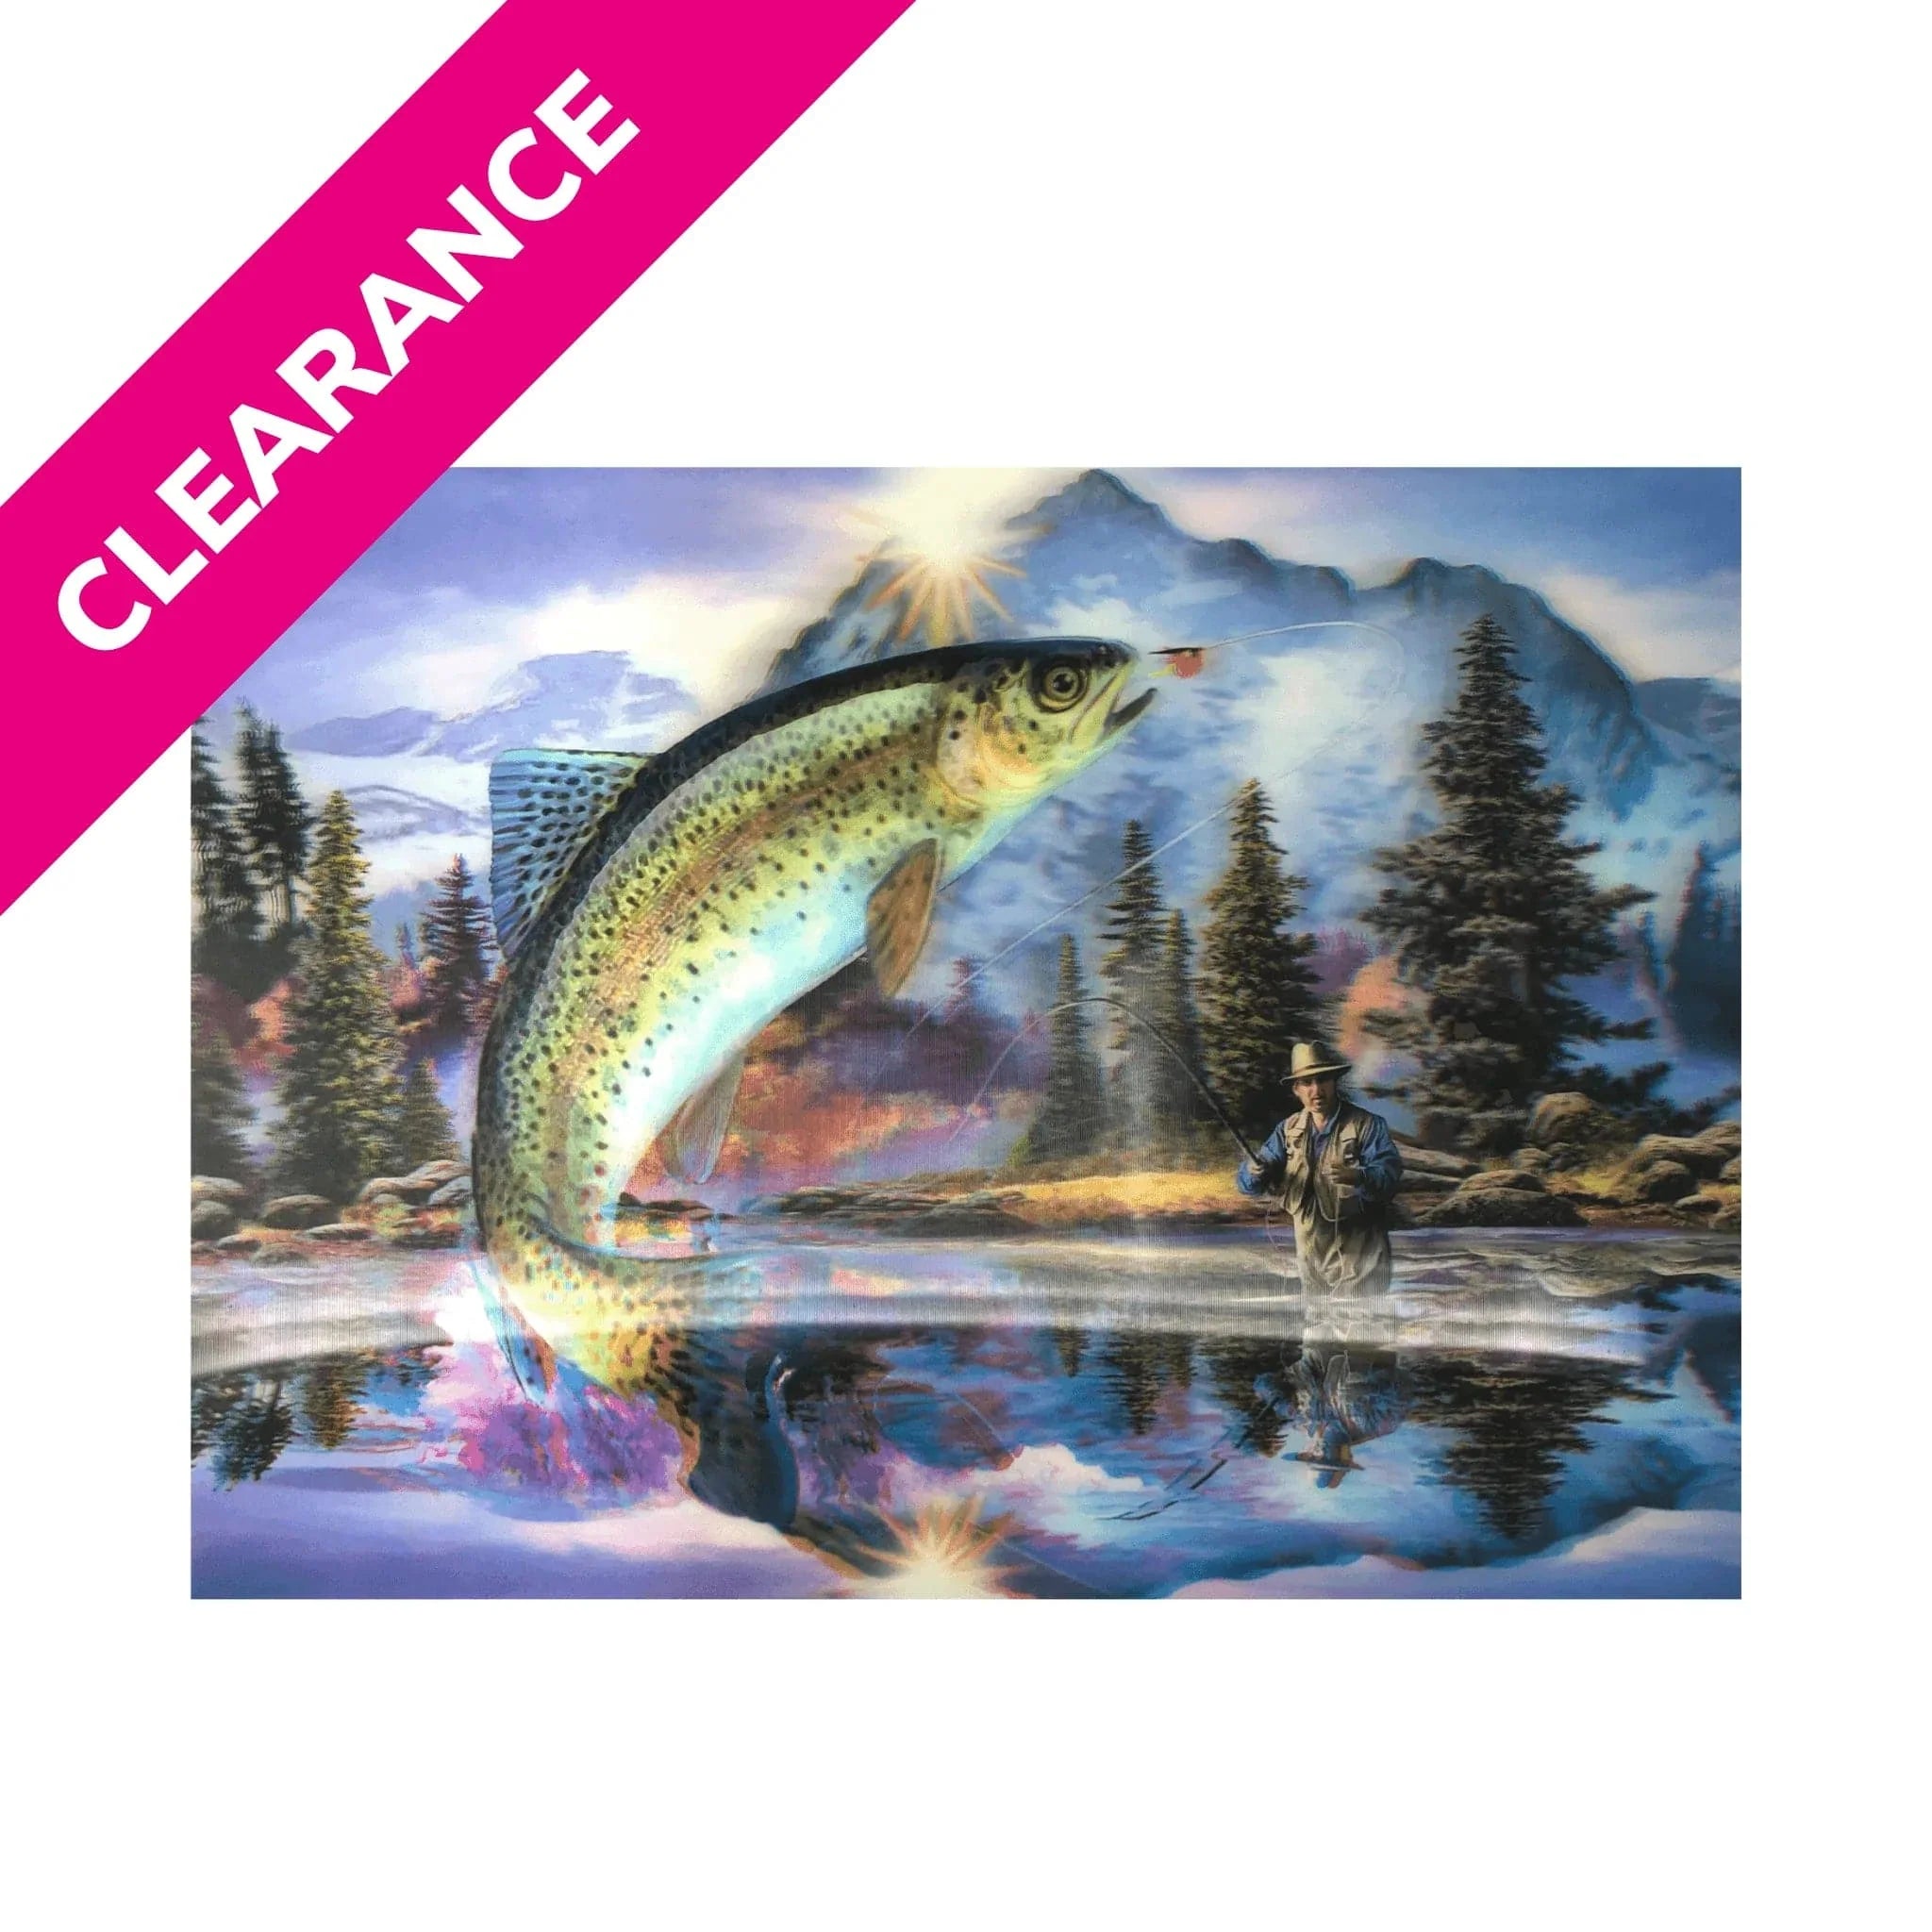 3D Large Placemats Fishing - Kids Party Craft